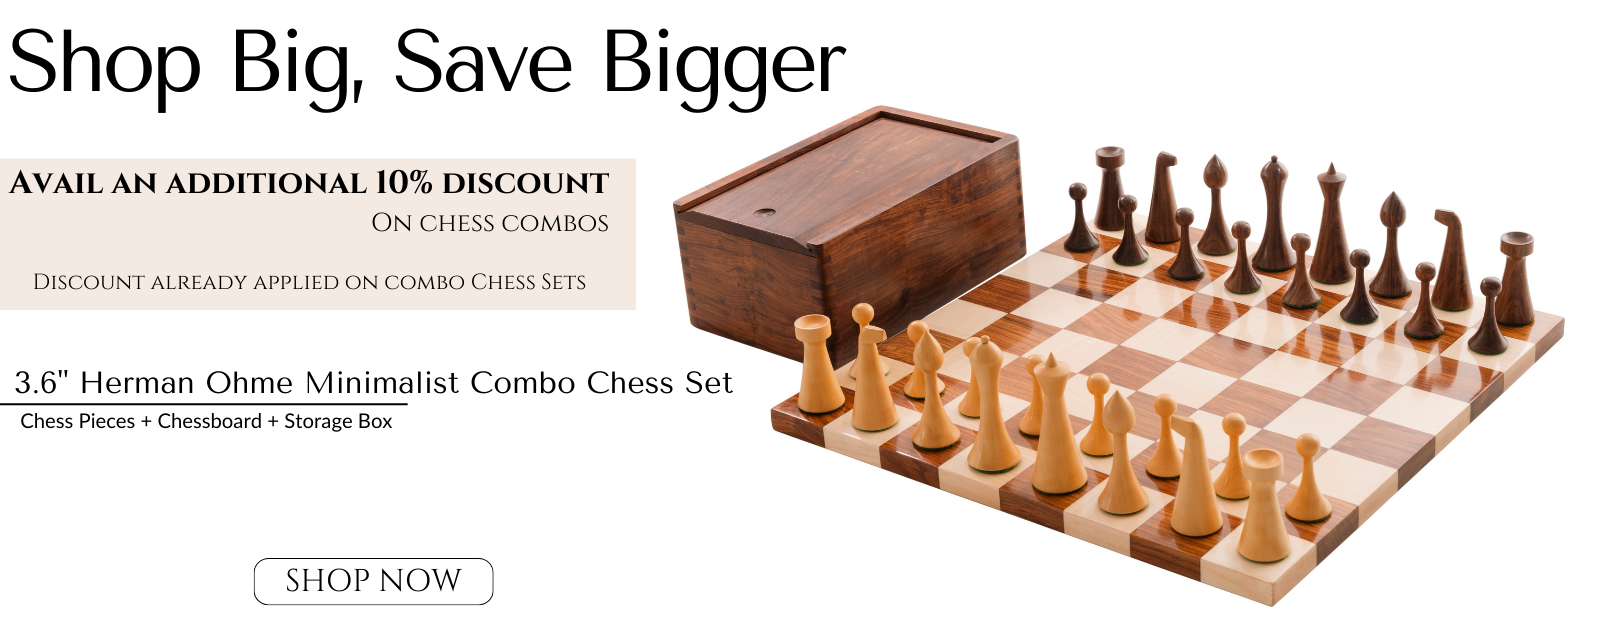 Buy Wooden Chess Board Set Online at Best Price in India